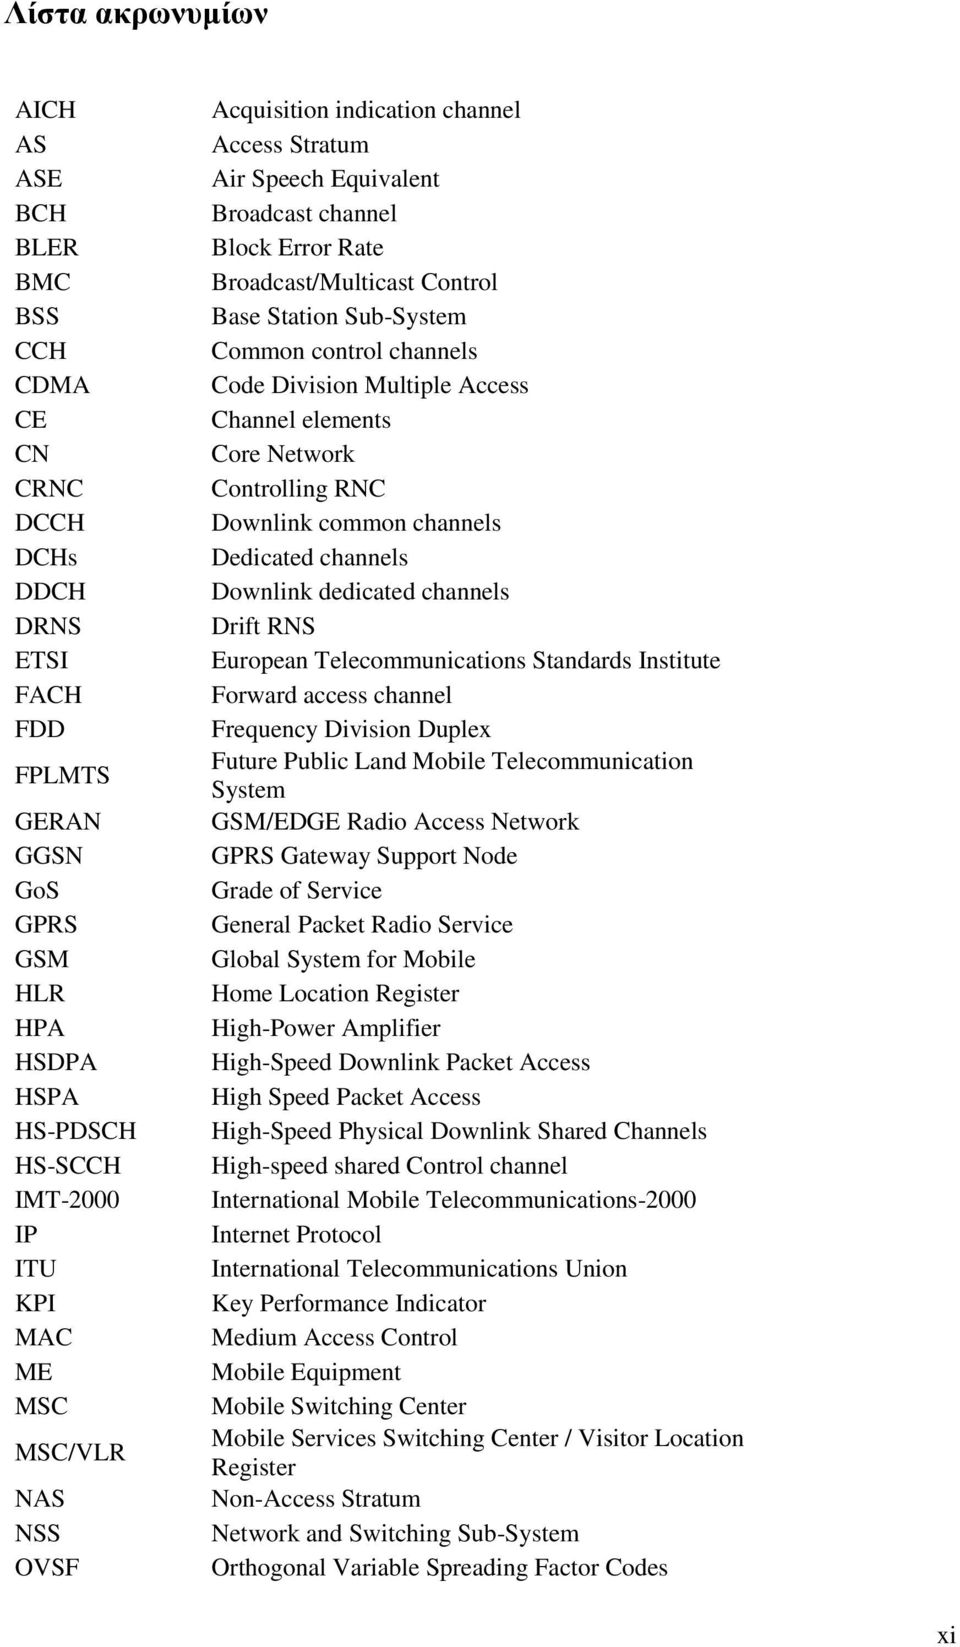 Code Division Multiple Access Channel elements Core Network Controlling RNC Downlink common channels Dedicated channels Downlink dedicated channels Drift RNS European Telecommunications Standards